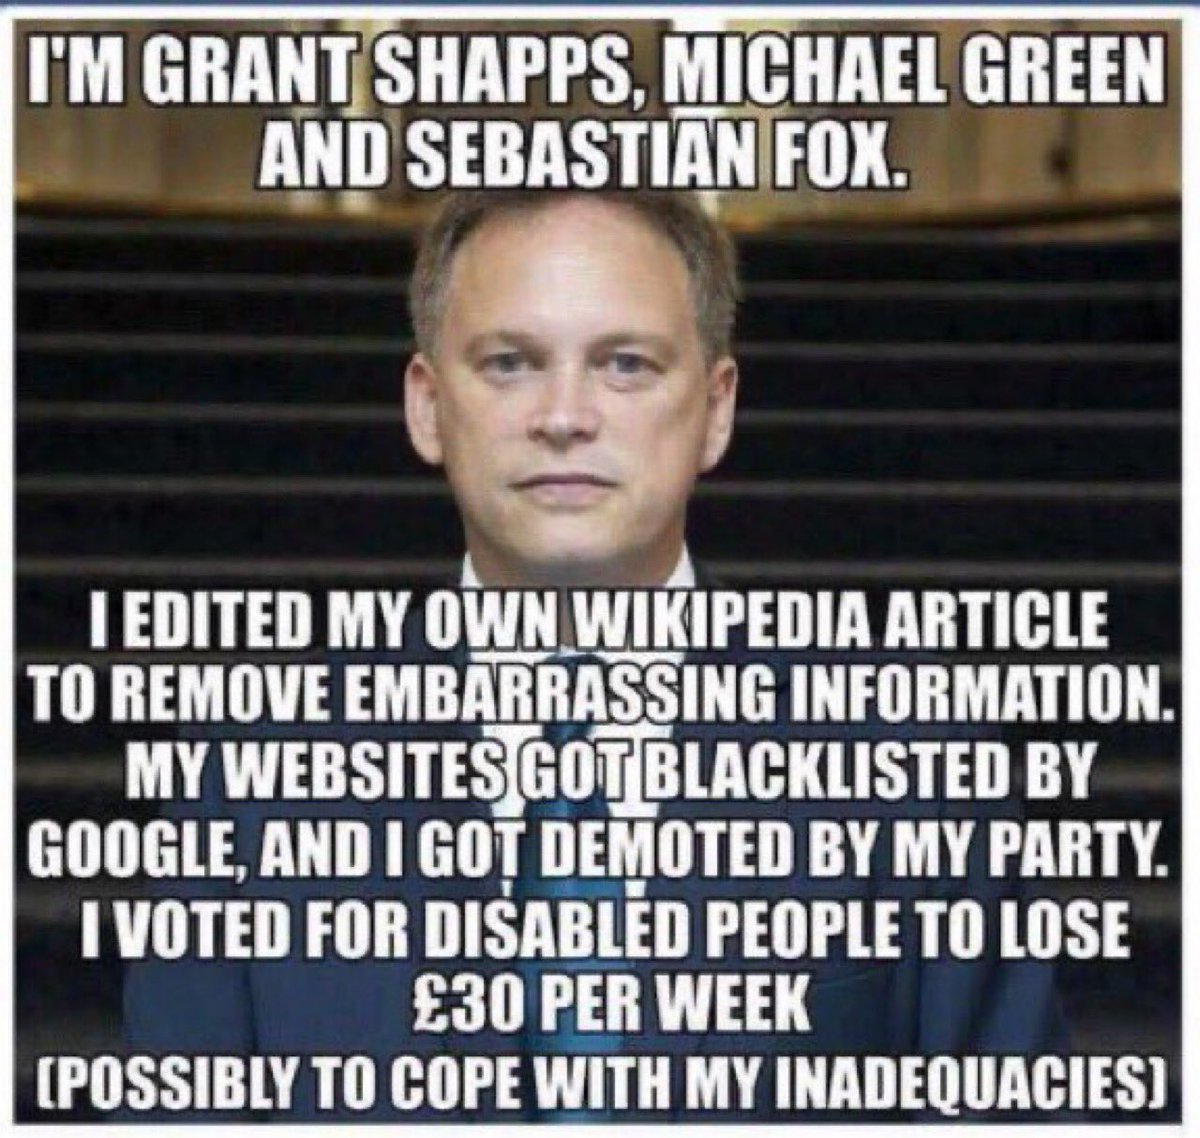 Fun fact: the Right Dishonourable Grant Shapps MP has had more Cabinet jobs in one year - five - than he has bogus identities. Now that’s magic! 
#GrantShapps #GruntShatts #ToryShyster